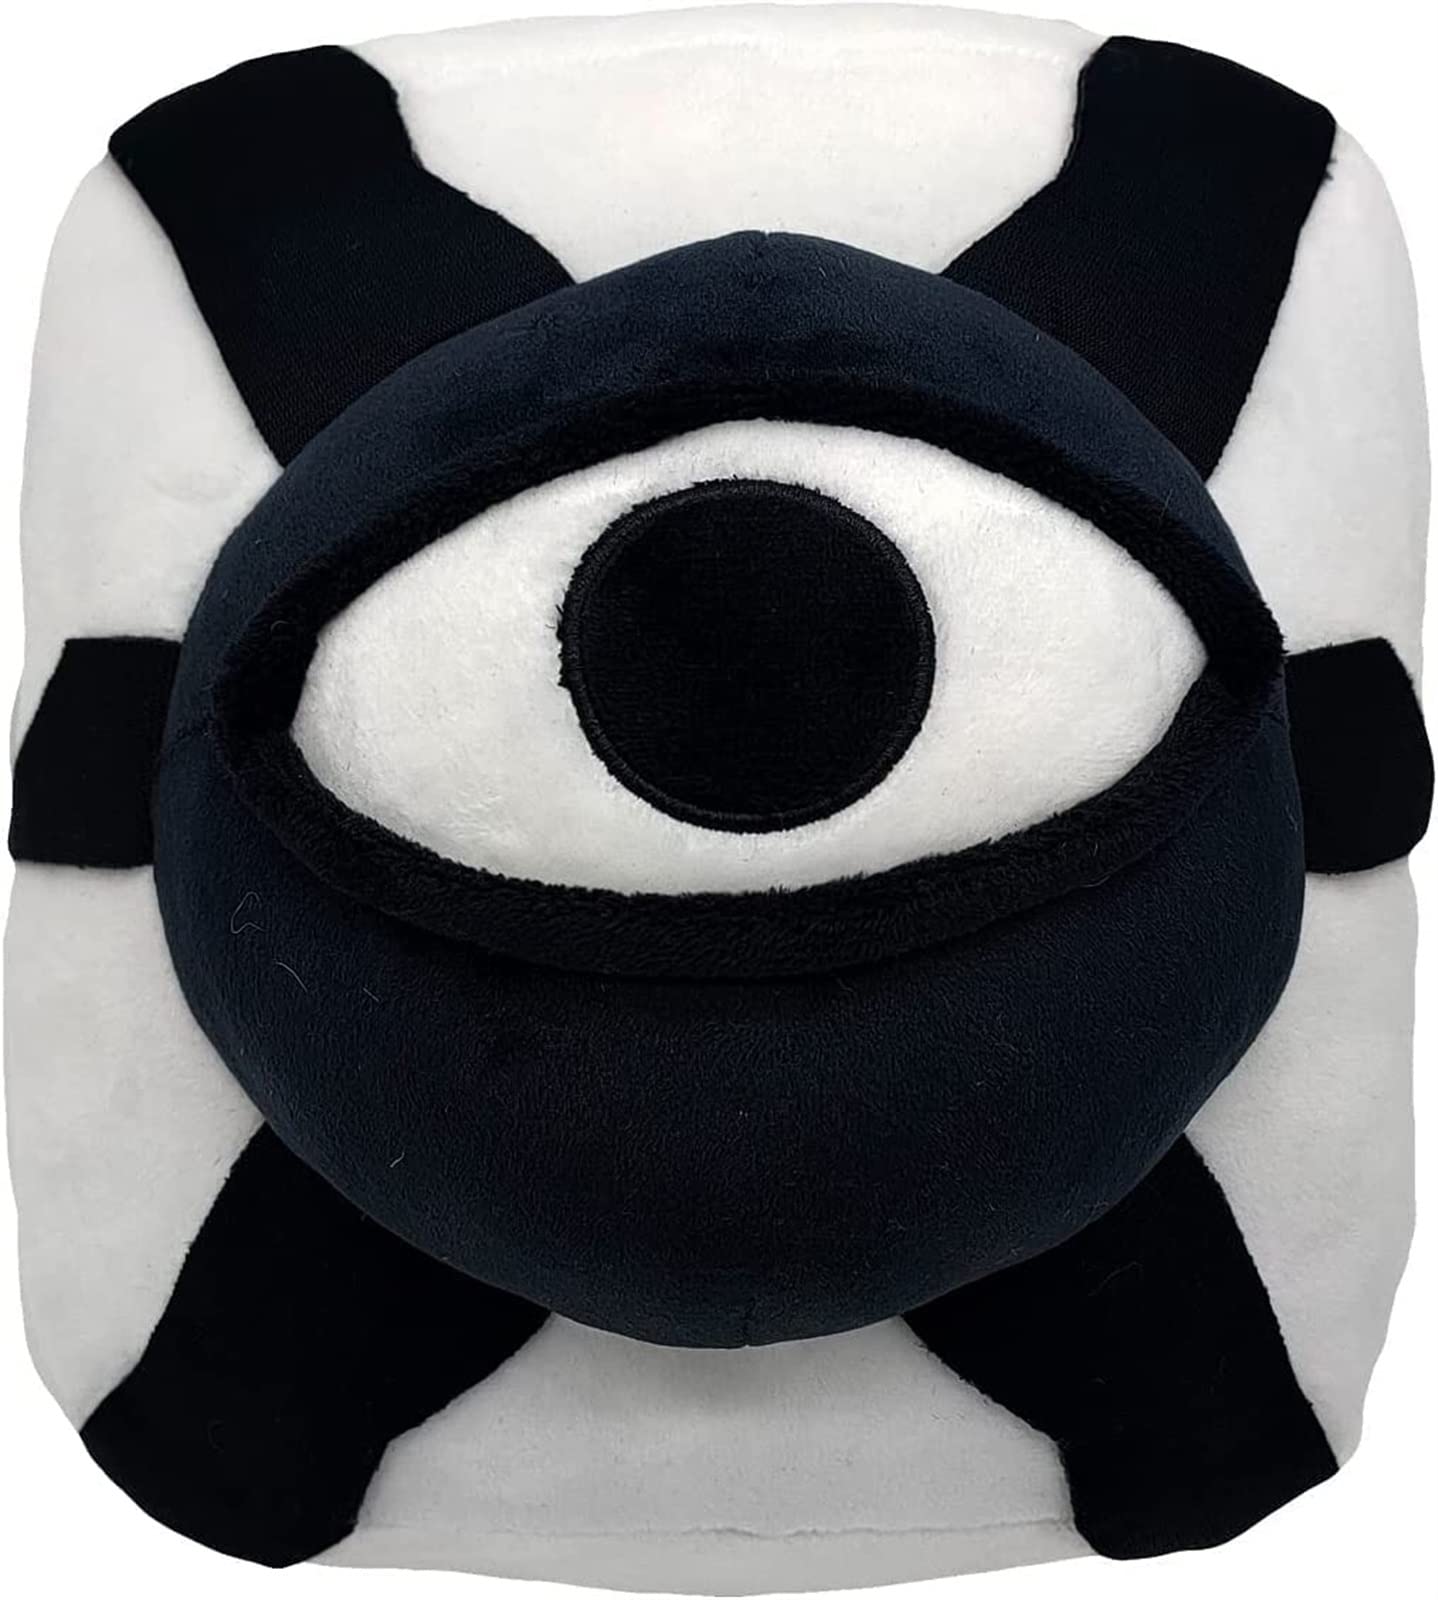 Collect Doors Plushies: Music and Memories